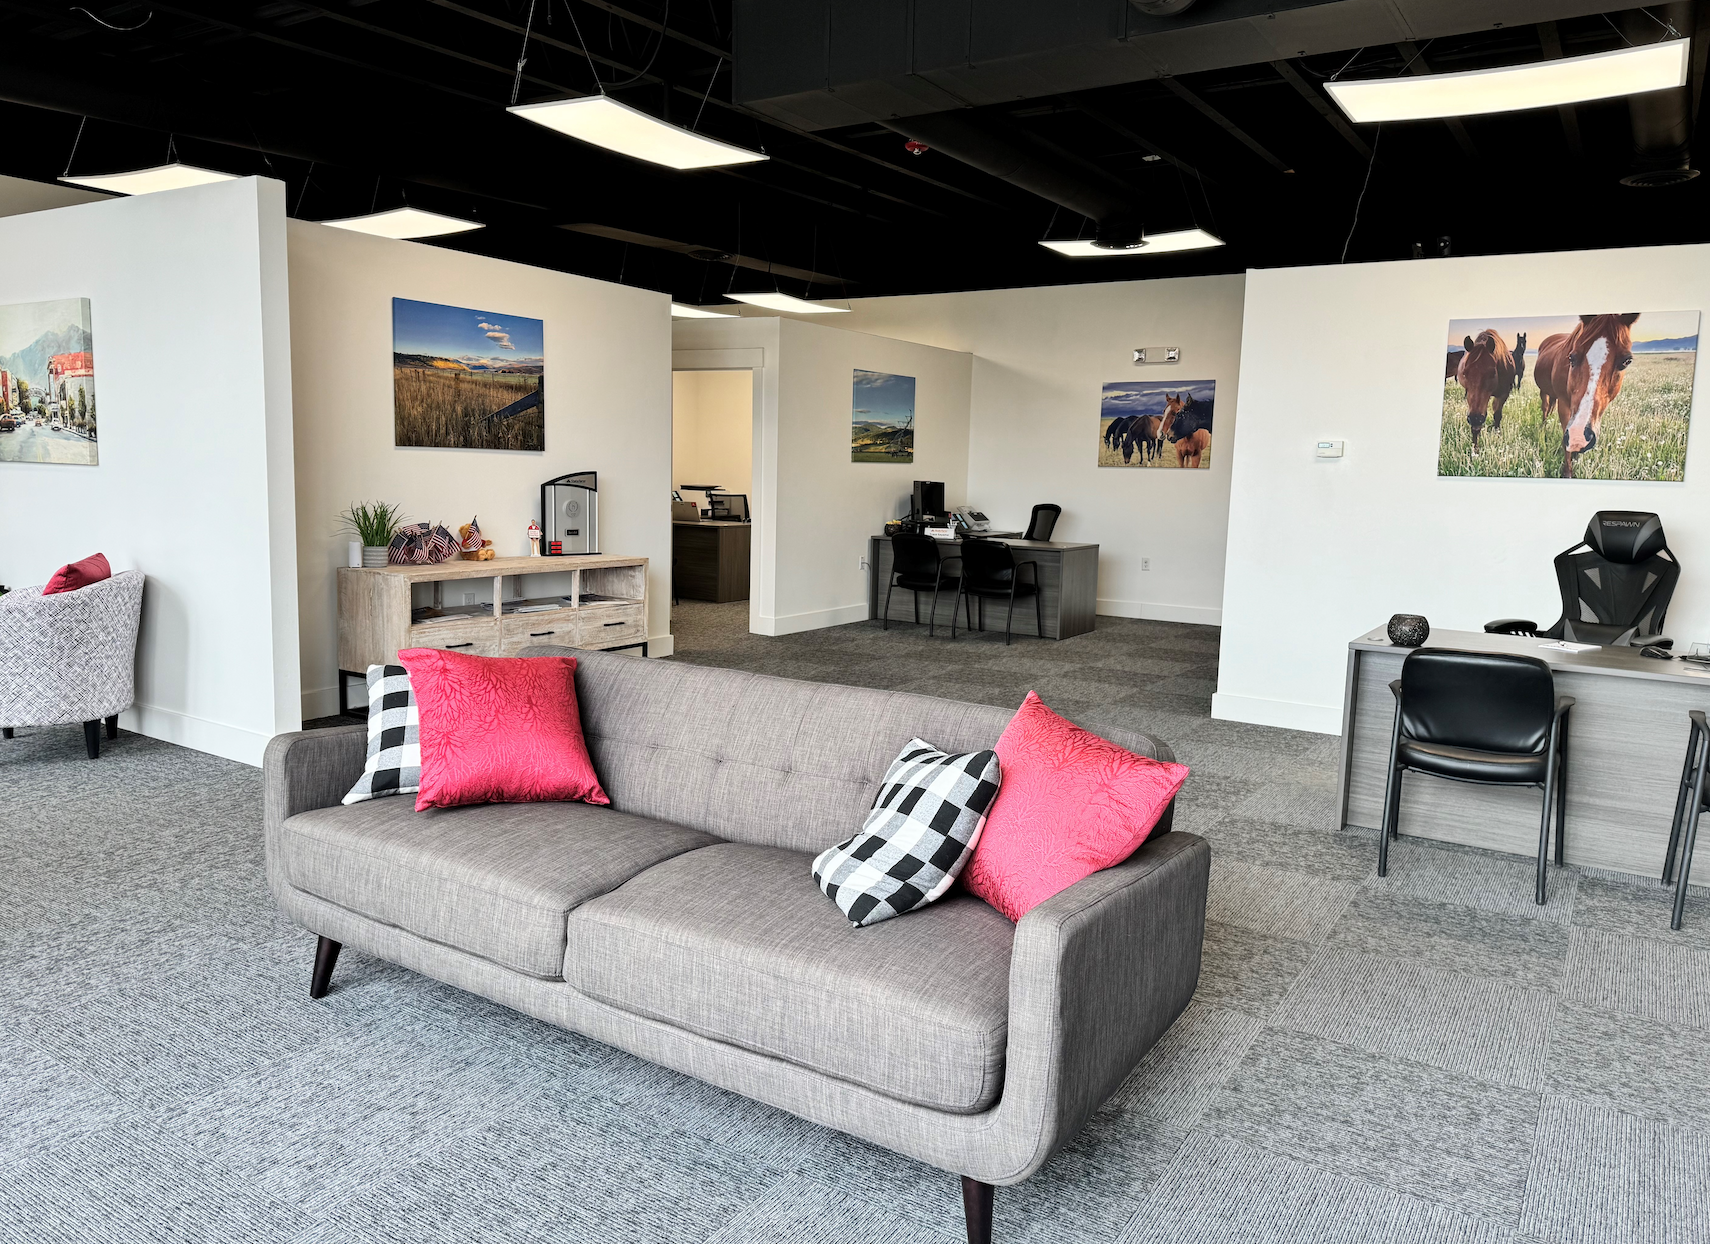 Step inside our cozy State Farm Agency and let us help you find the perfect insurance coverage for your needs!